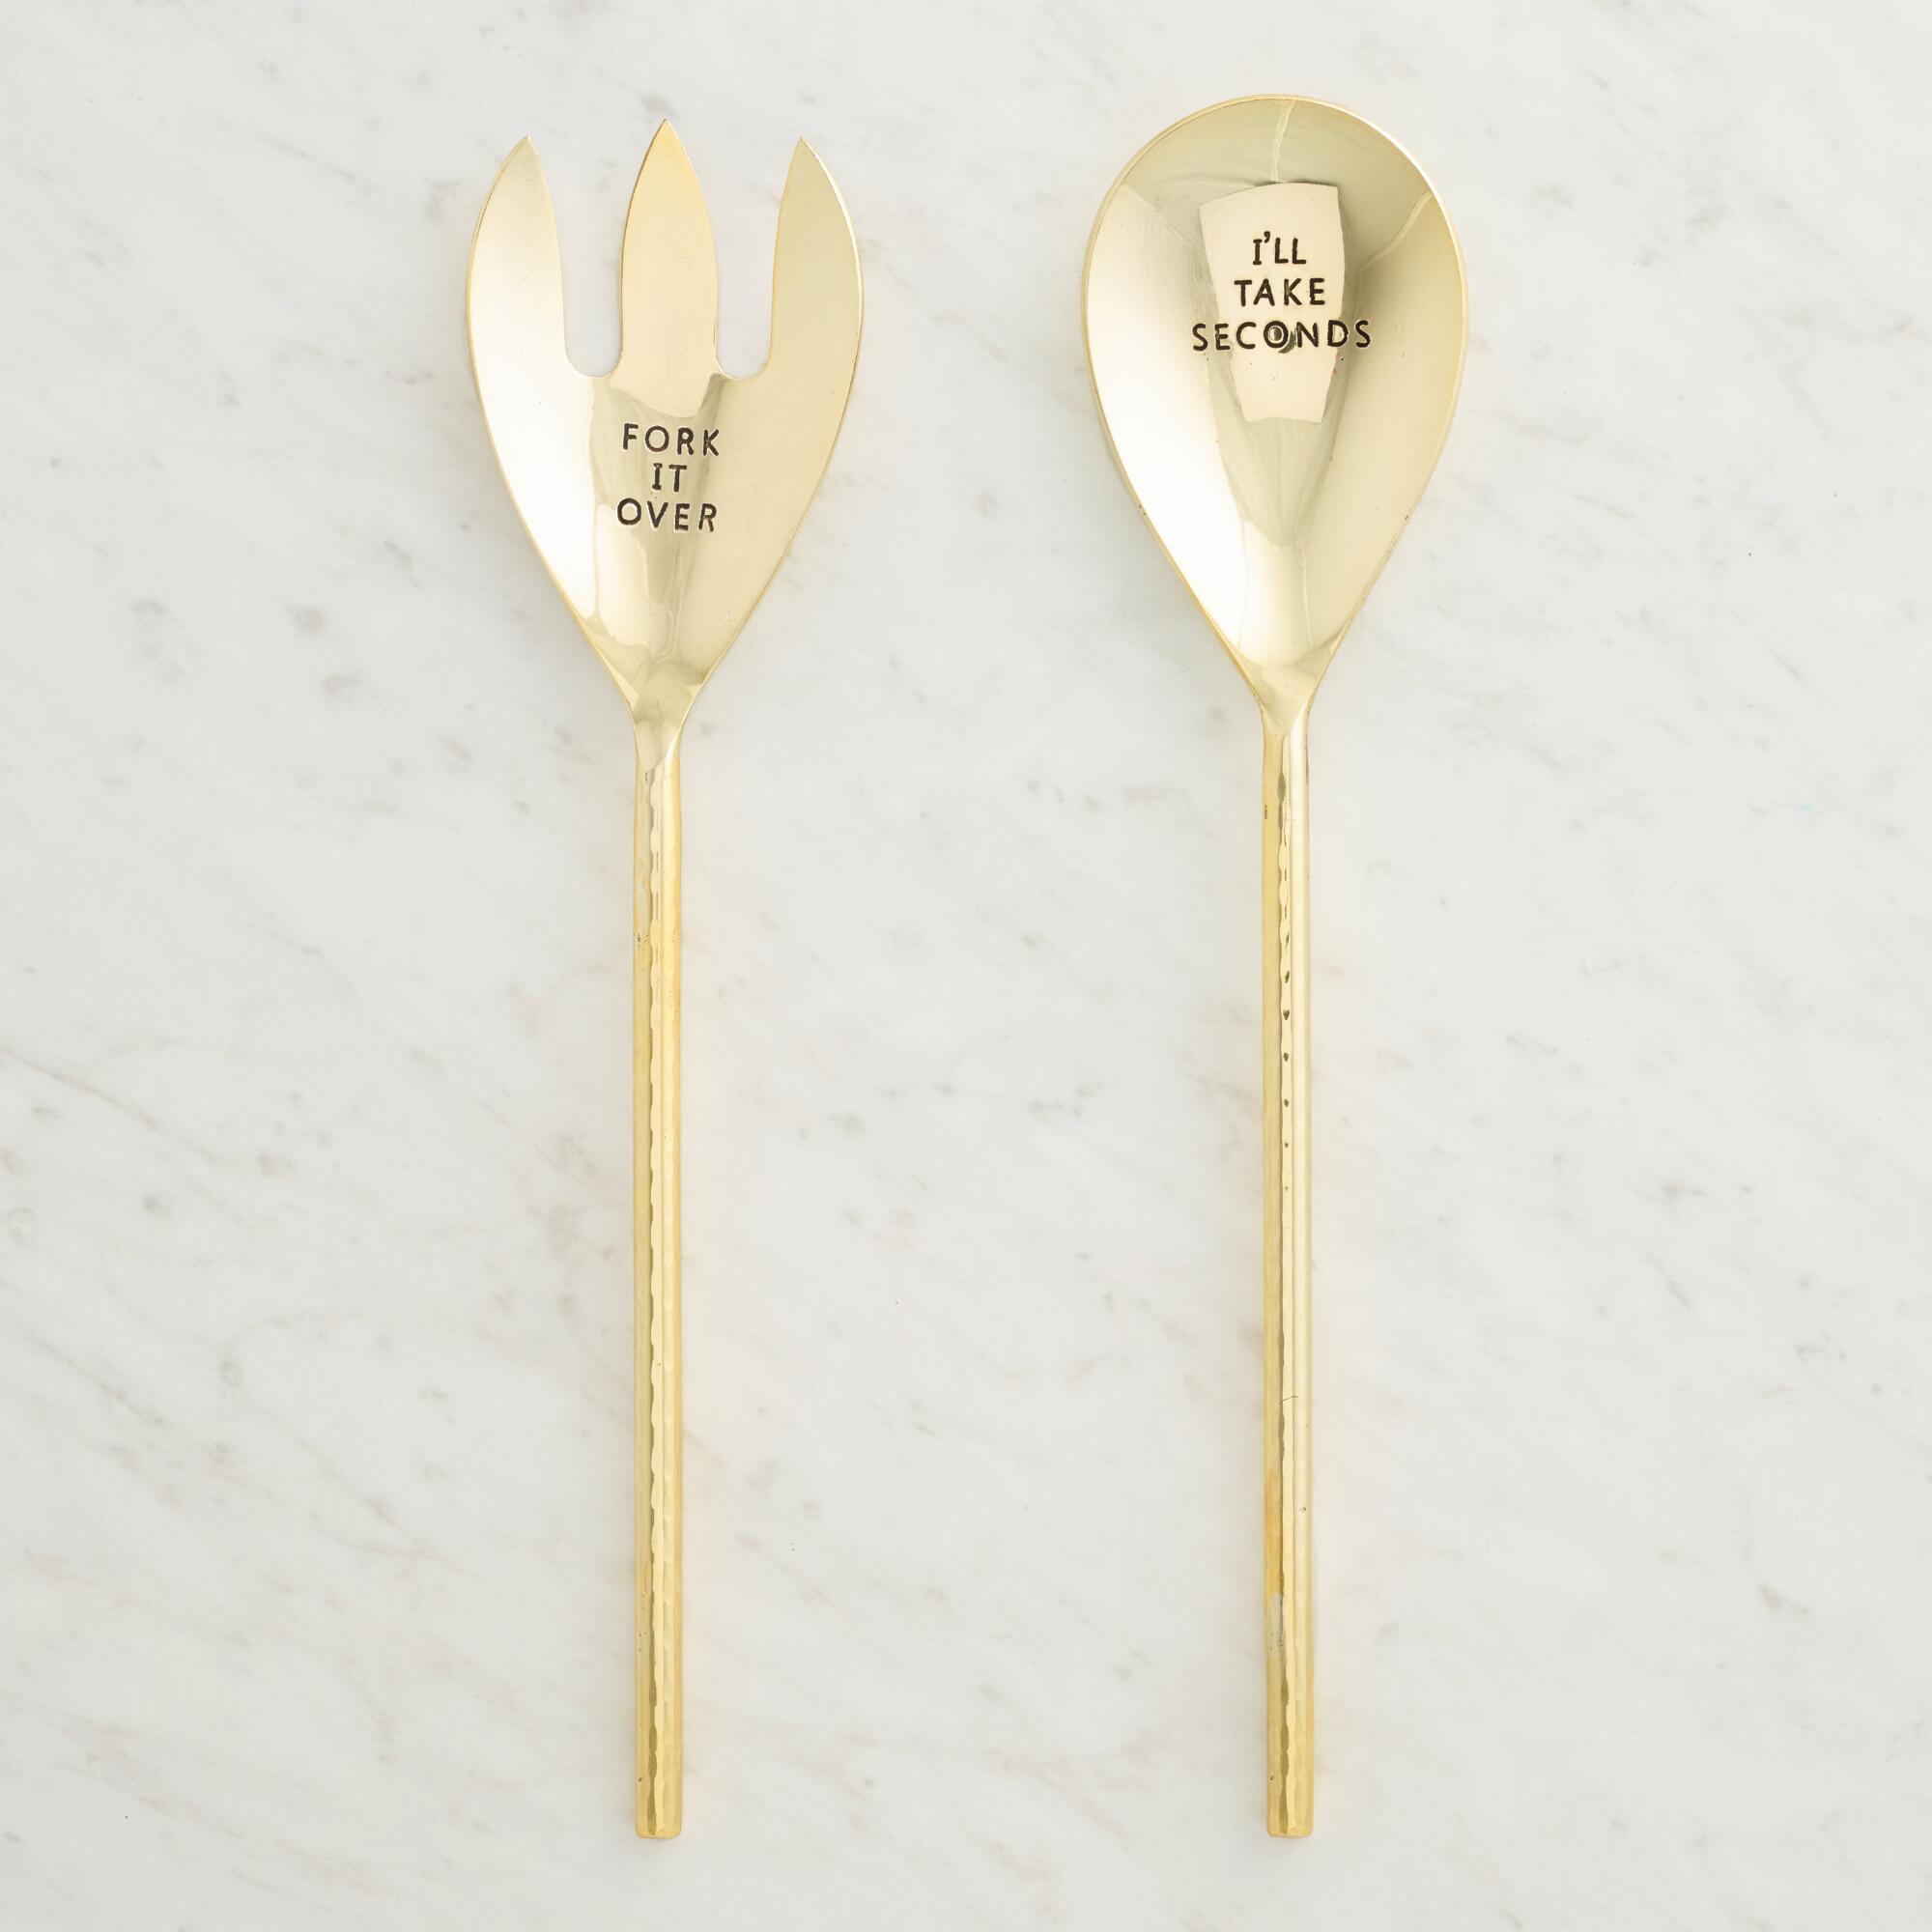 Stamped Serving Fork and Spoon - Set of 2